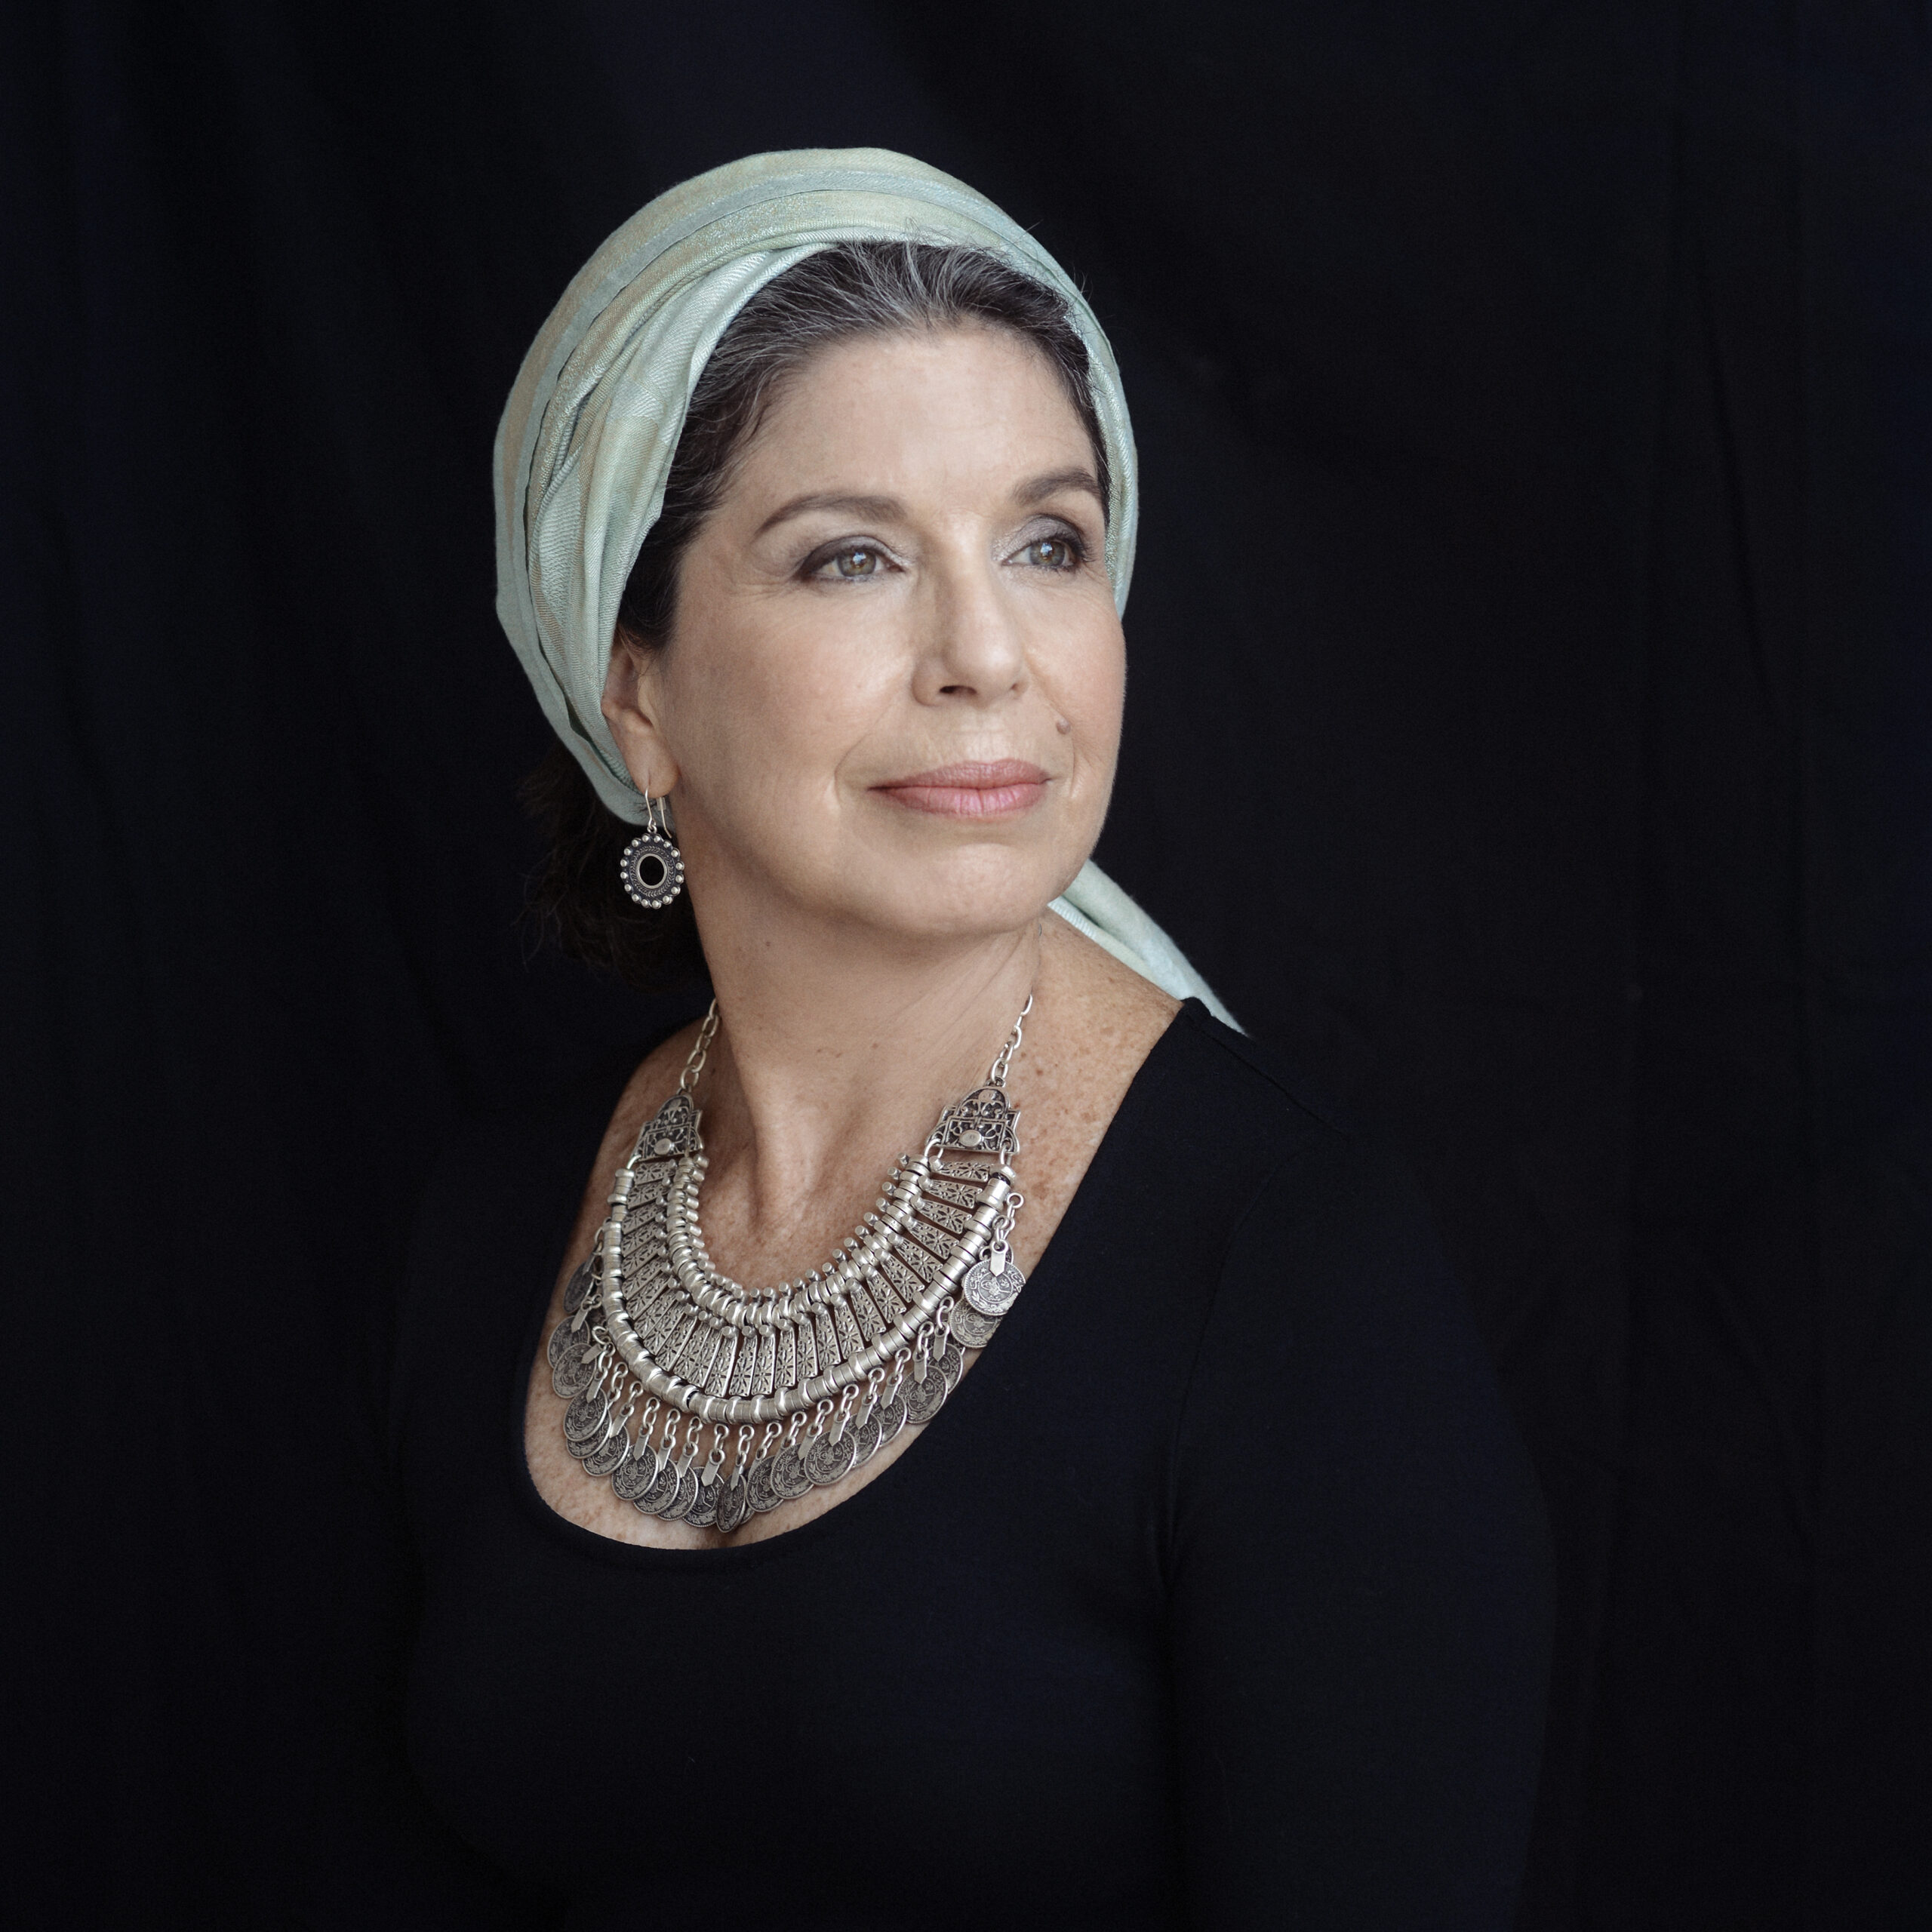 A headshot of Susana Behar Levy wearing a white turban and a black top with silver necklace.